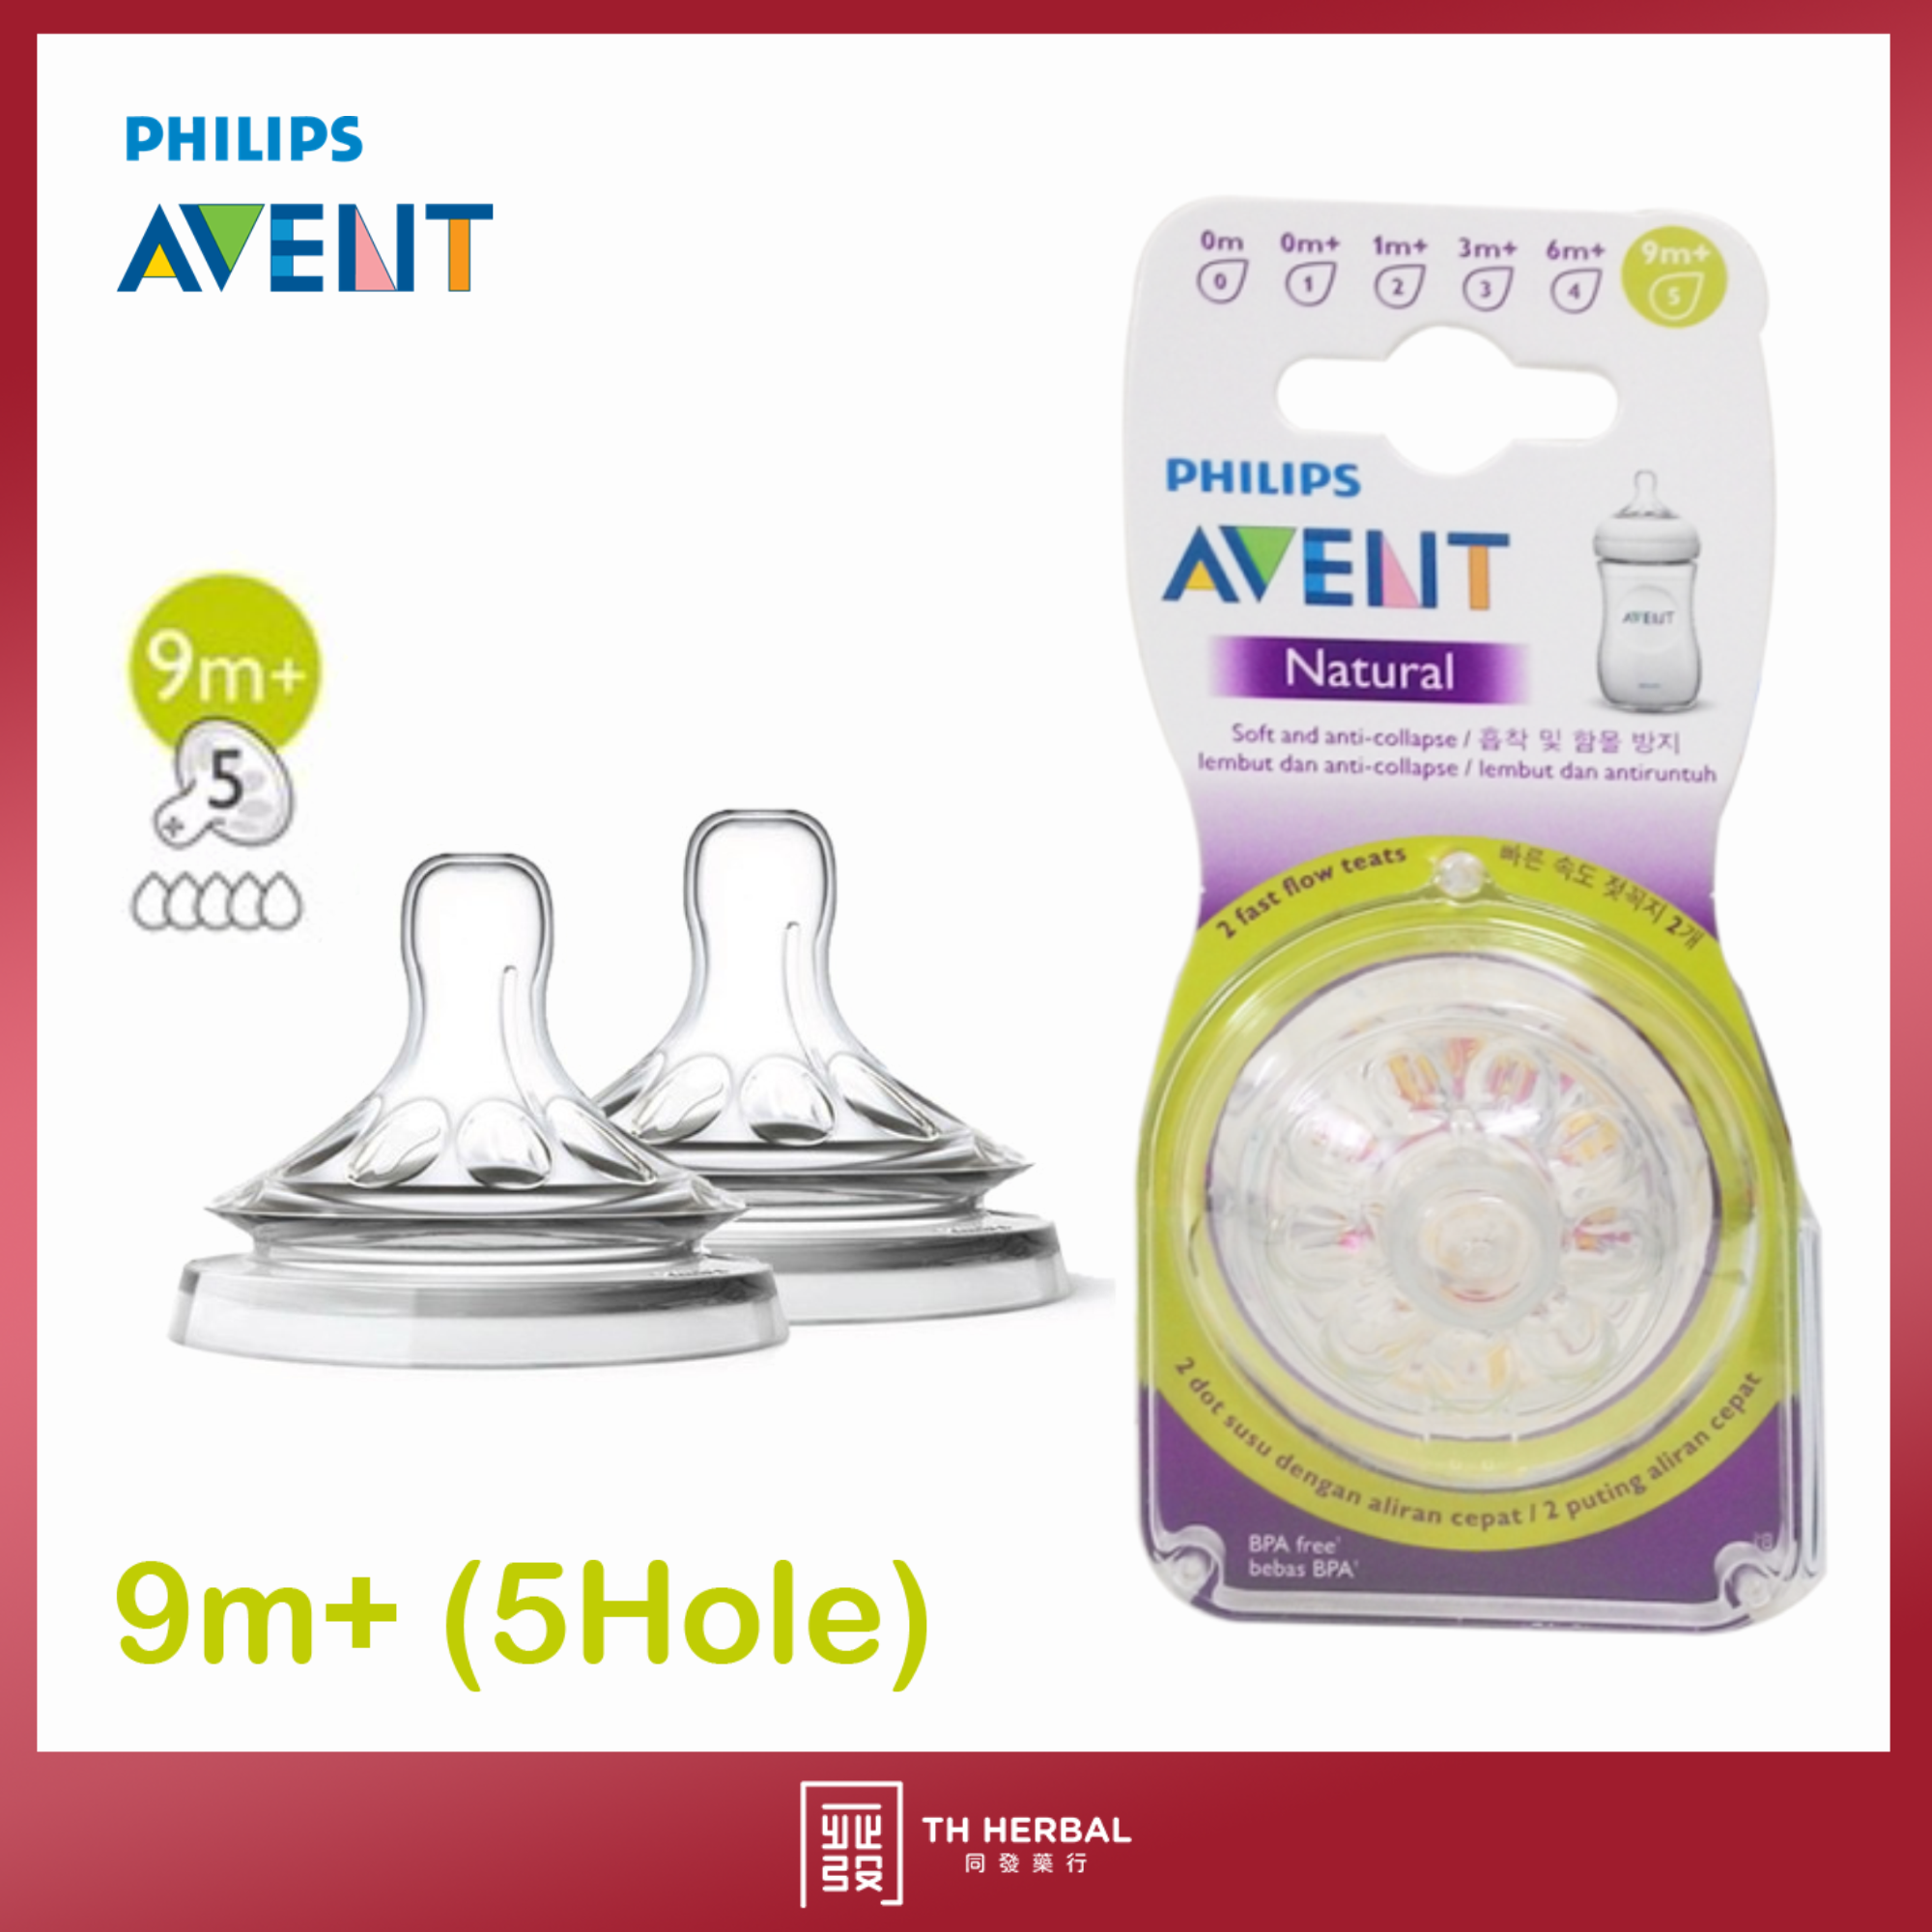 Avent Natural Extra Soft Teat 2.0 (2pcs Pack) 9m+ (5Hole).png